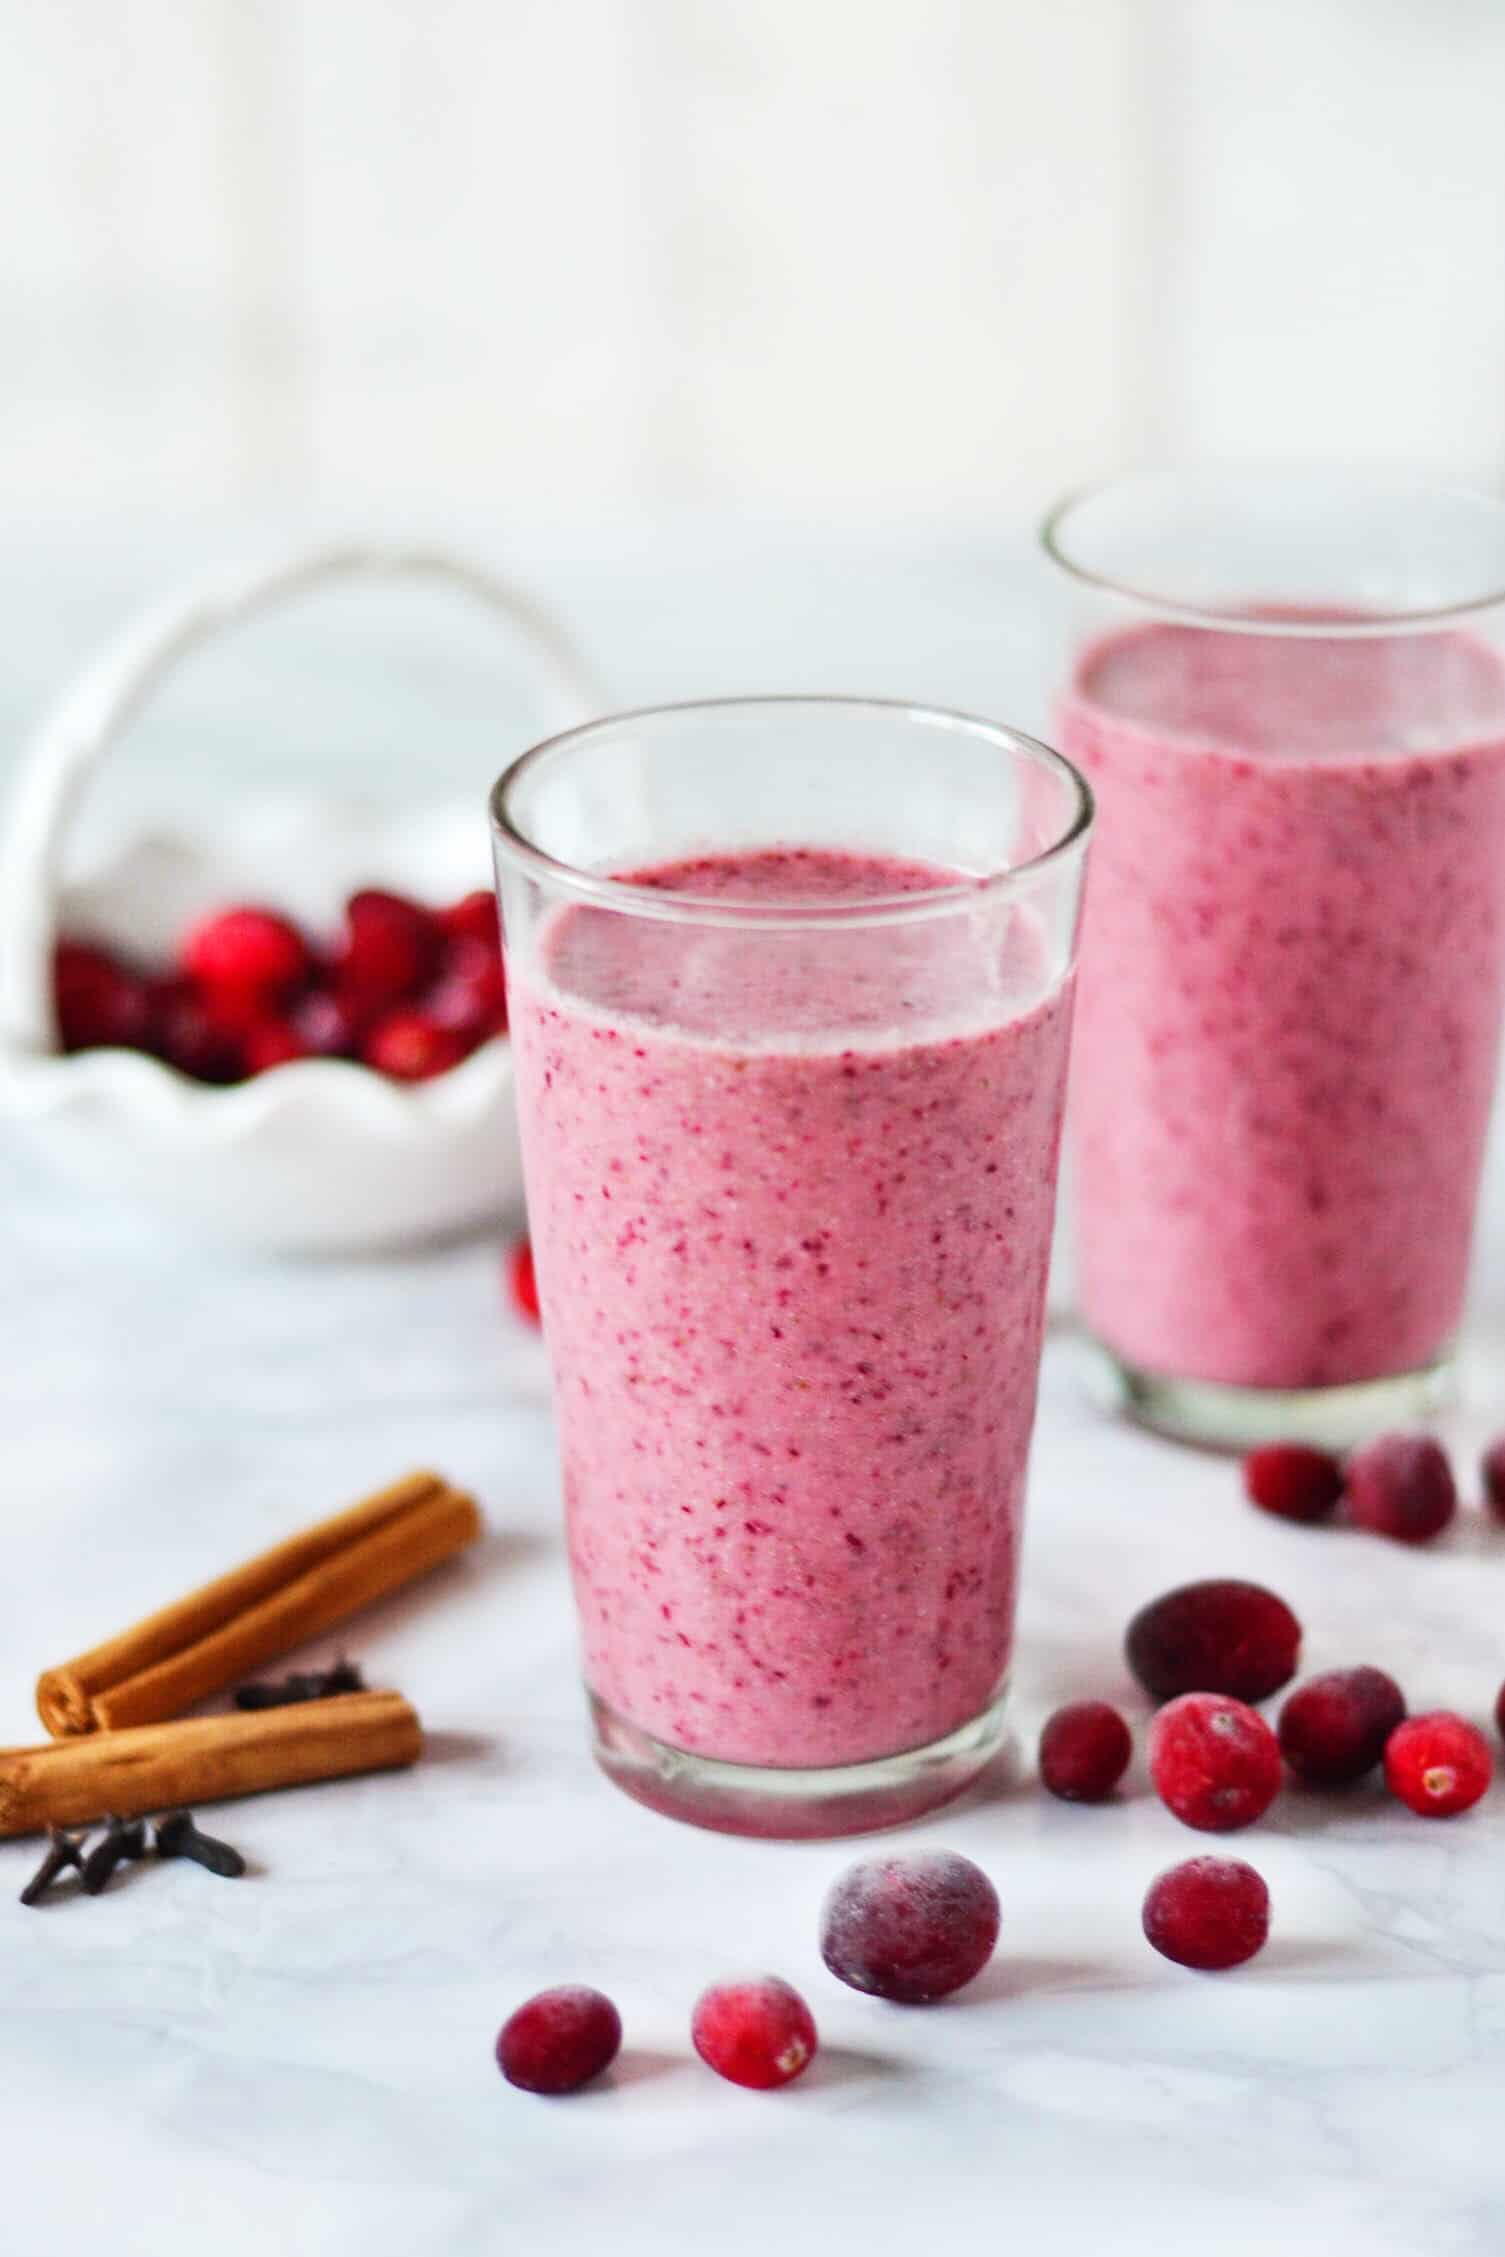 SPICED CRANBERRY SMOOTHIE